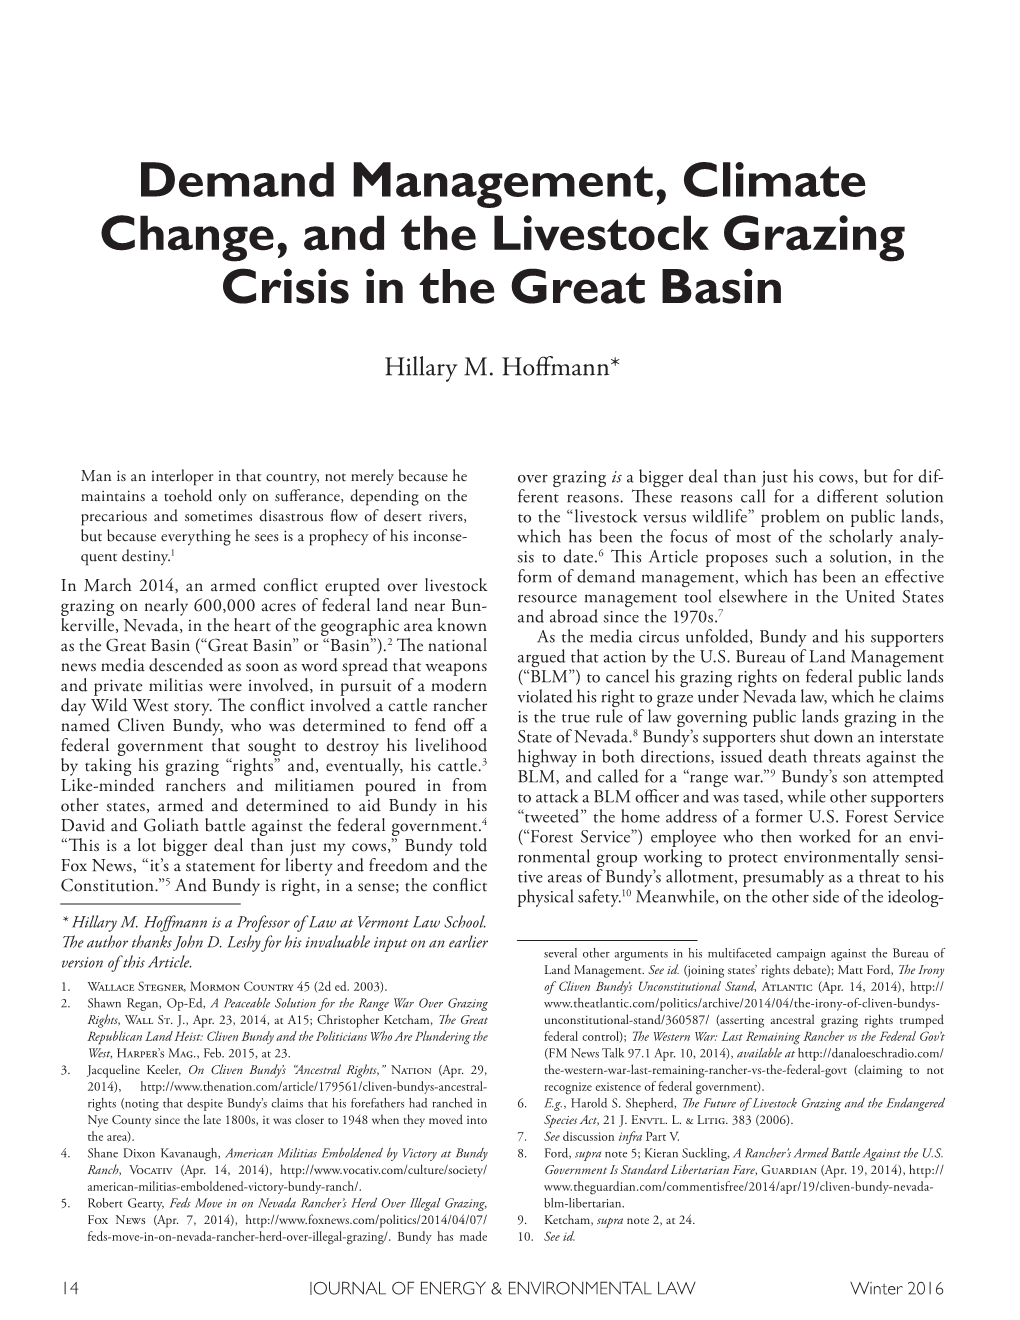 Demand Management, Climate Change, and the Livestock Grazing Crisis in the Great Basin